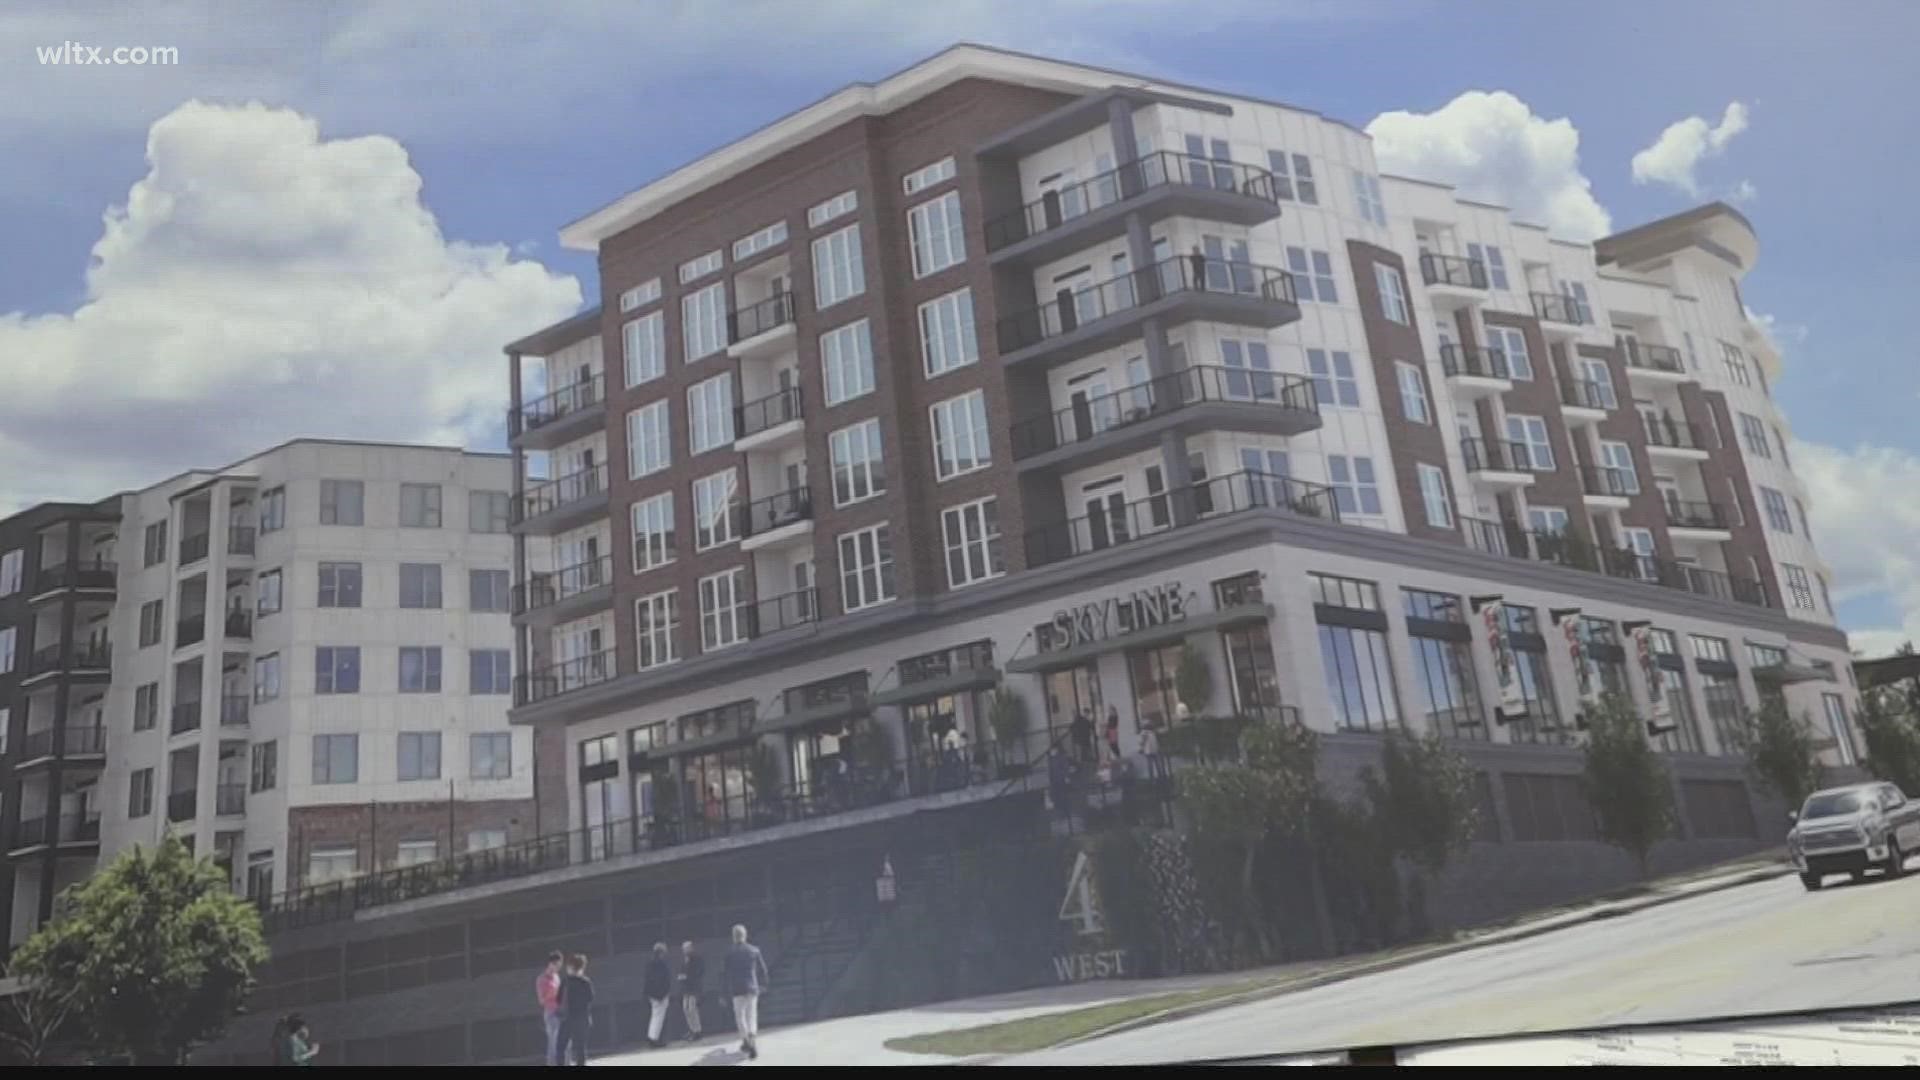 Four West will be located at the intersection of Meeting and State Streets in West Columbia.